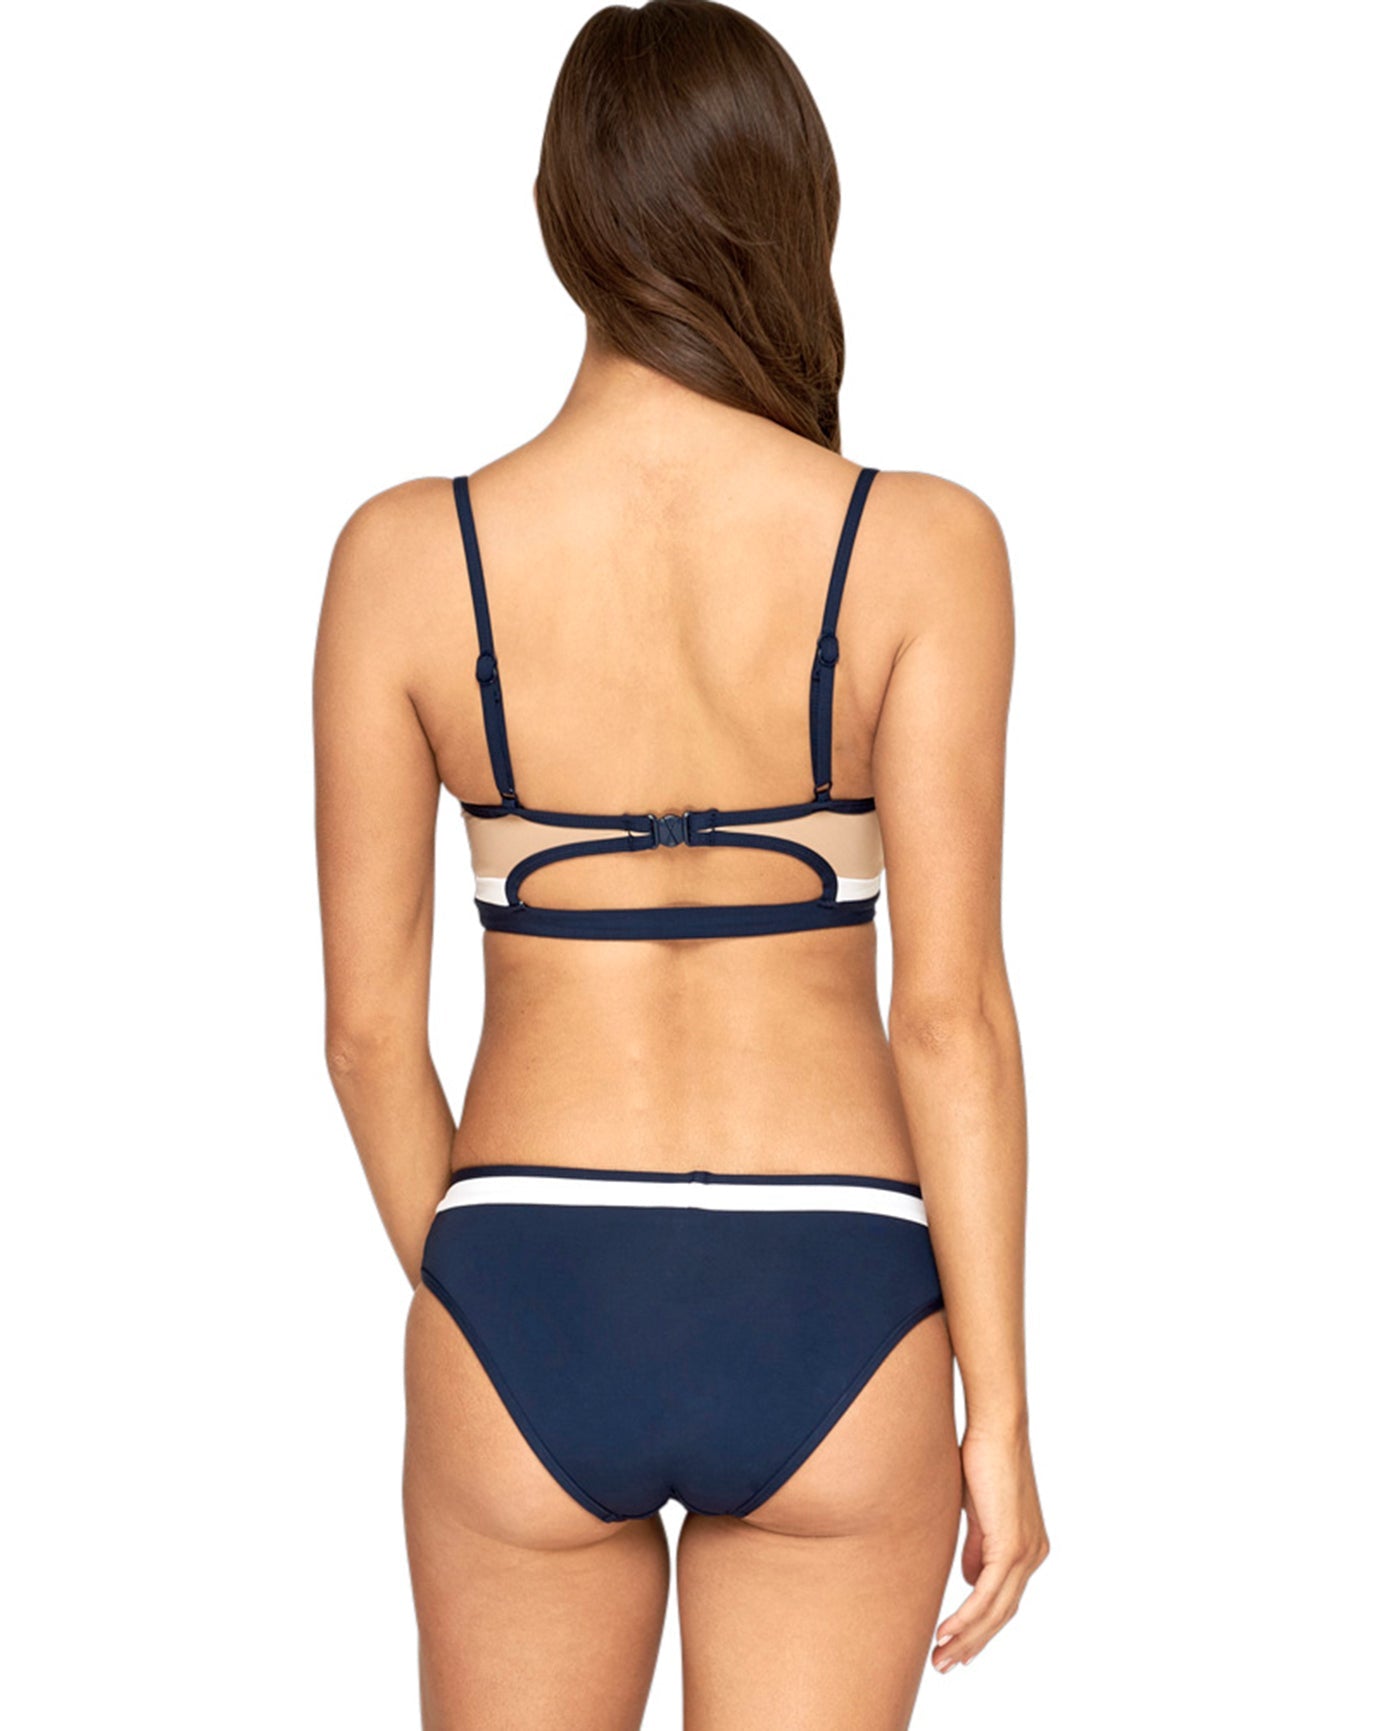 Back View Of Jets by Jessika Allen D Cup Underwire Bikini Top | JET CB NAVY